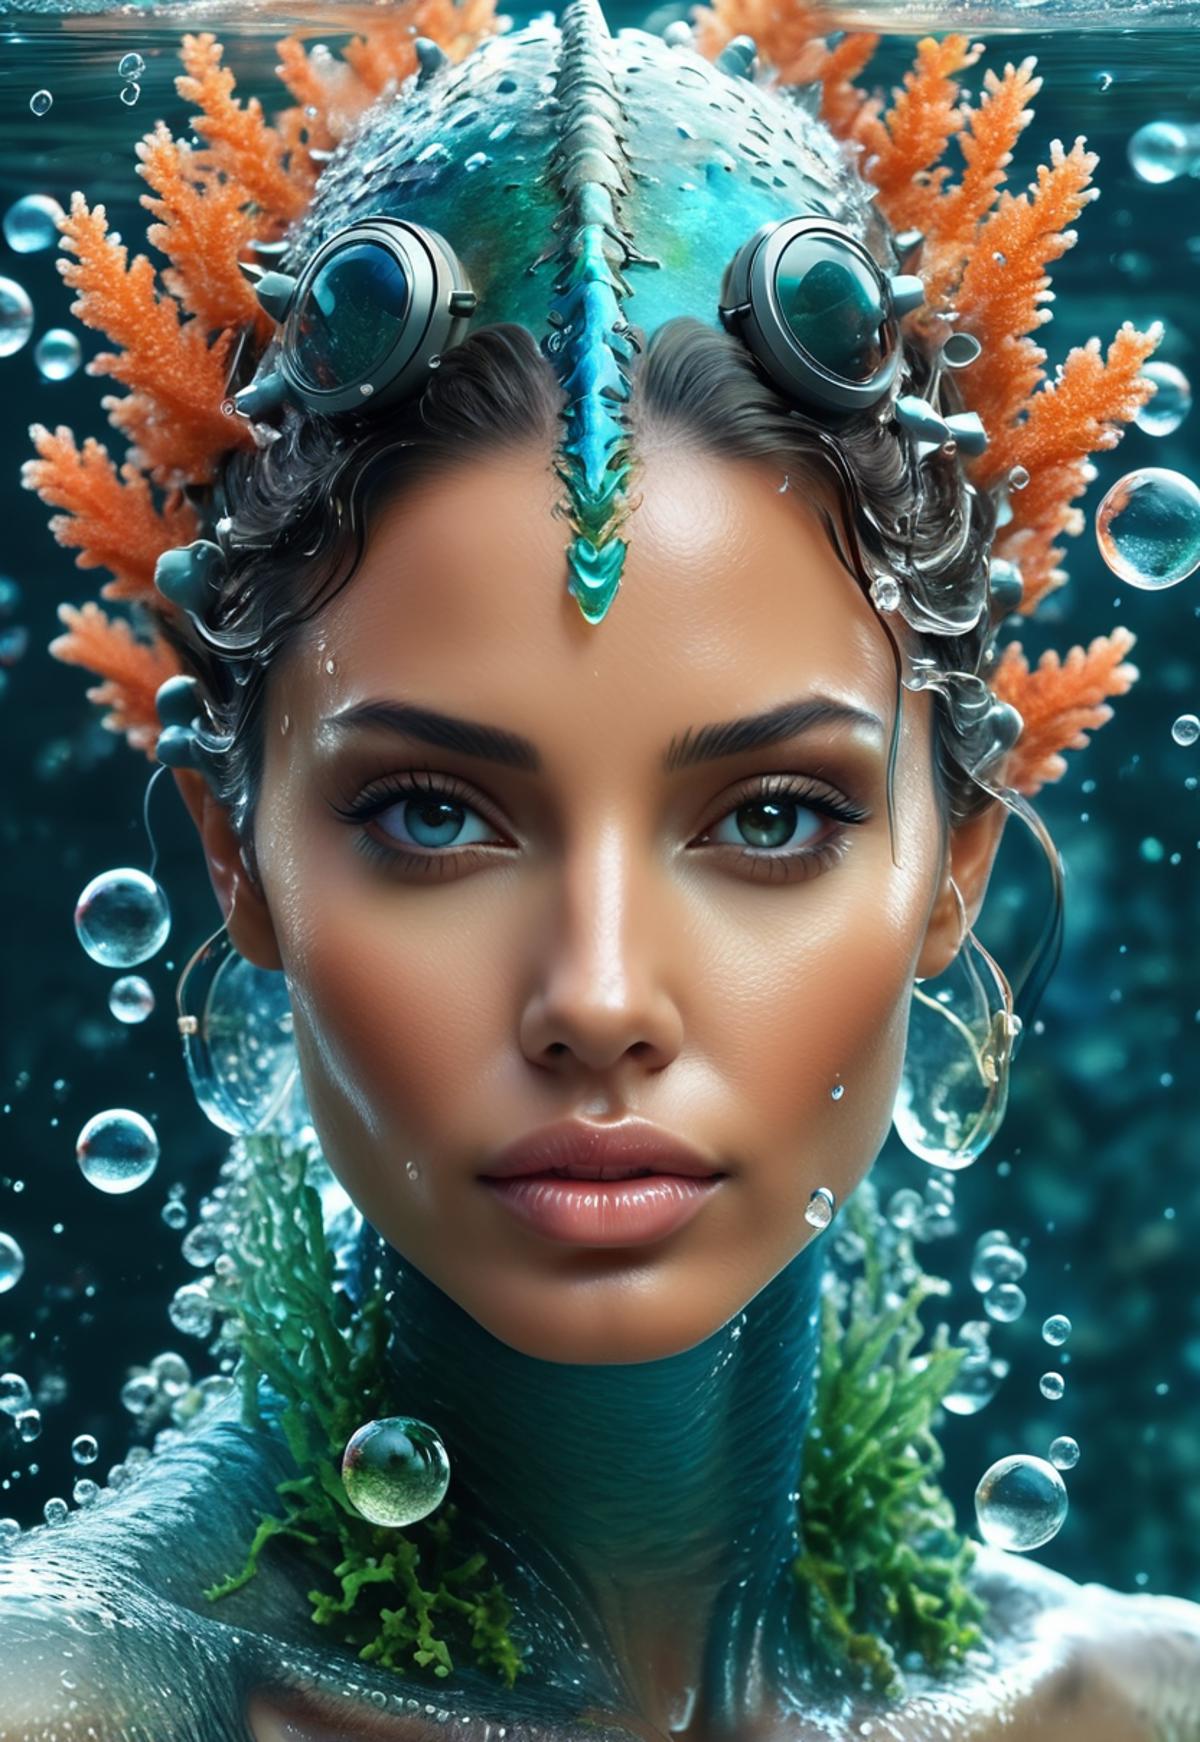 isometric style character 3D, 1 water monster woman,agelina jolie,  thousand corals and moles grow on neck and face, sci-f...